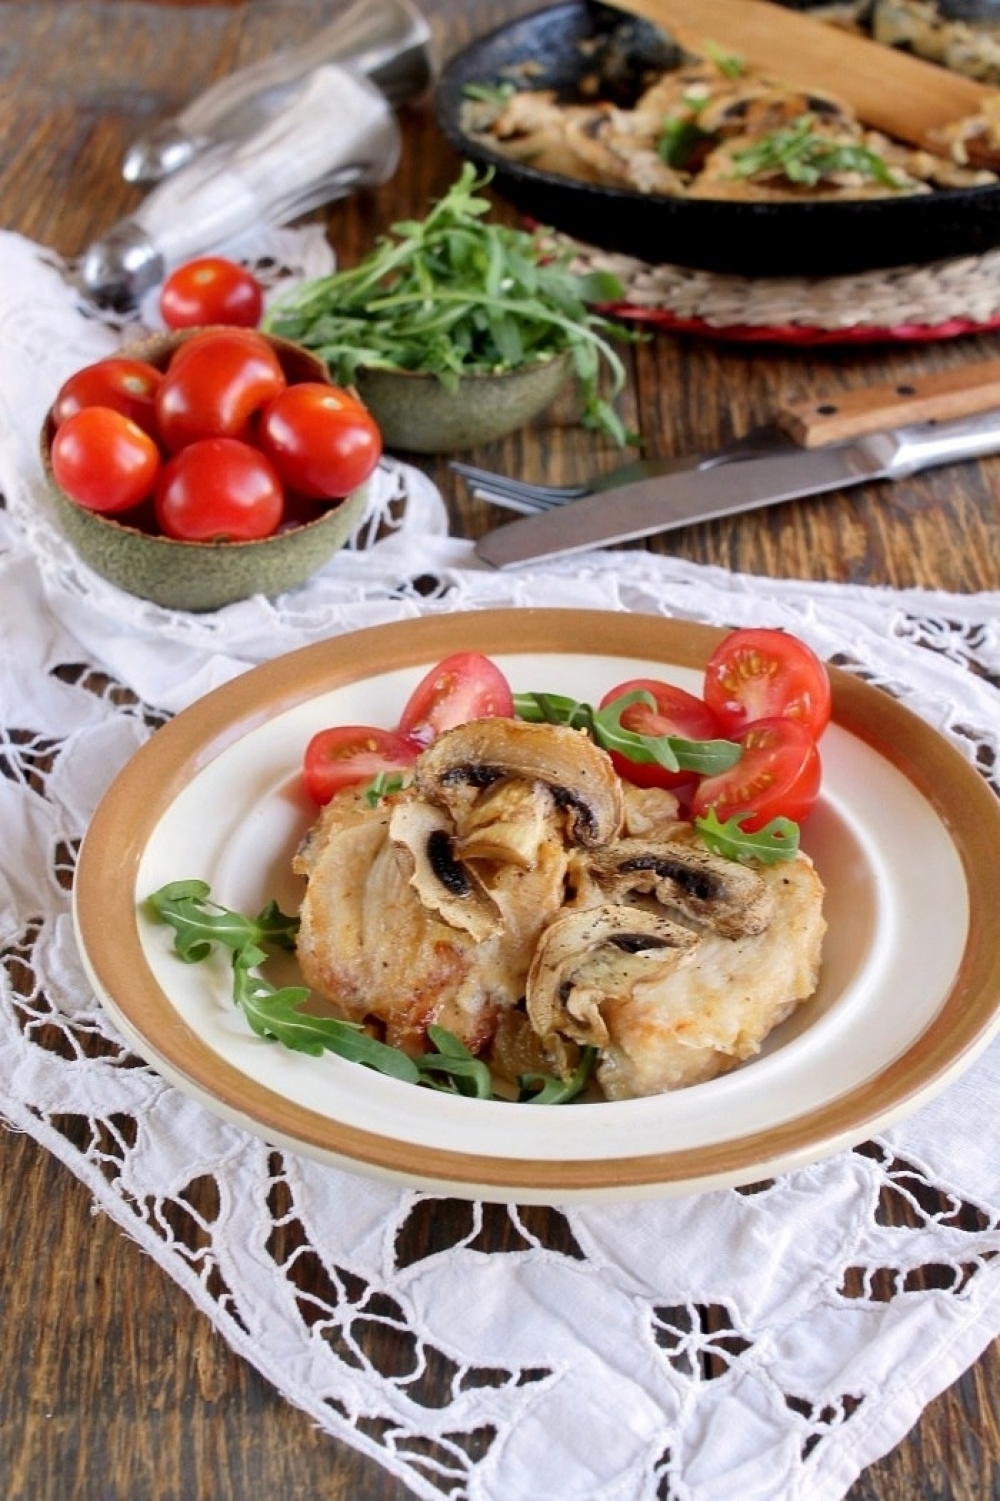 Chicken fricassee with mushrooms